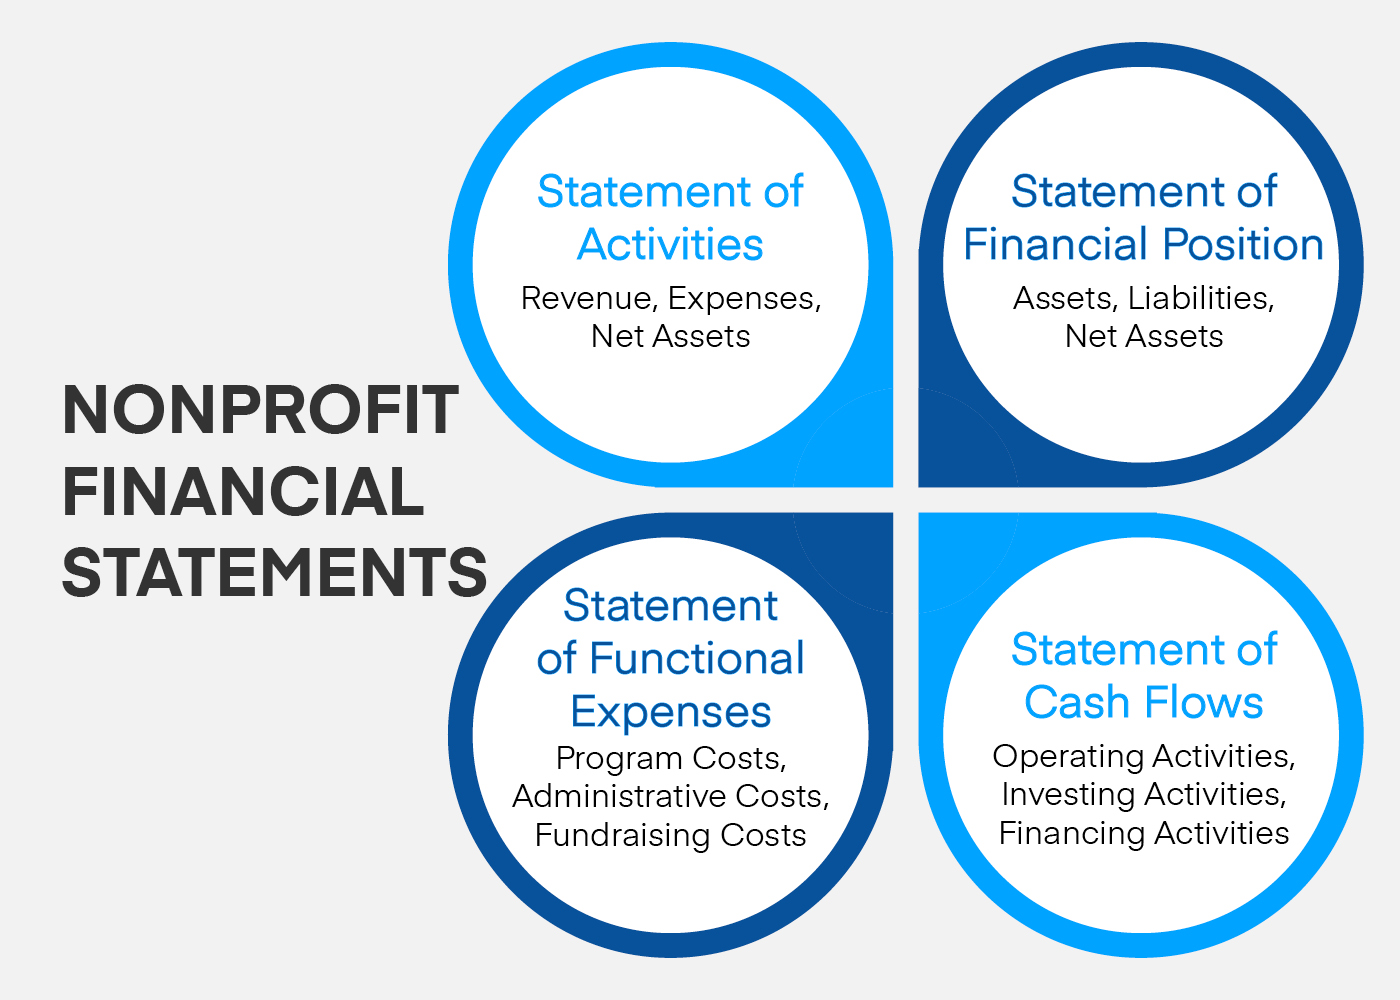 A mind map of the four core nonprofit financial statements necessary for understanding nonprofit finances.